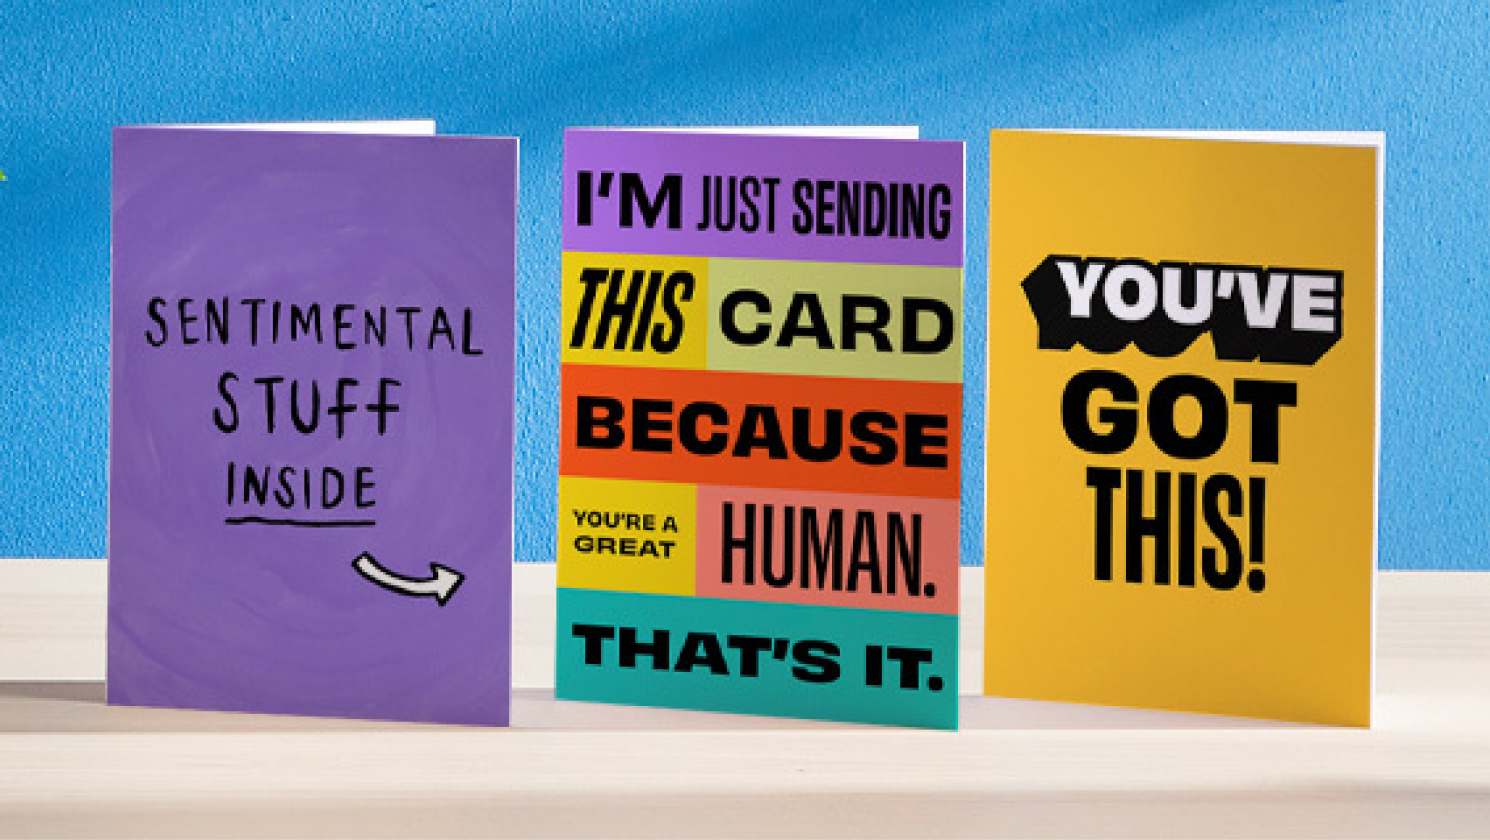 Image of three greetings cards that read: 'Sentimental Stuff Inside', 'I'm Just Sending This Card Because You're a Great Human. That's It' and 'You've Got This'